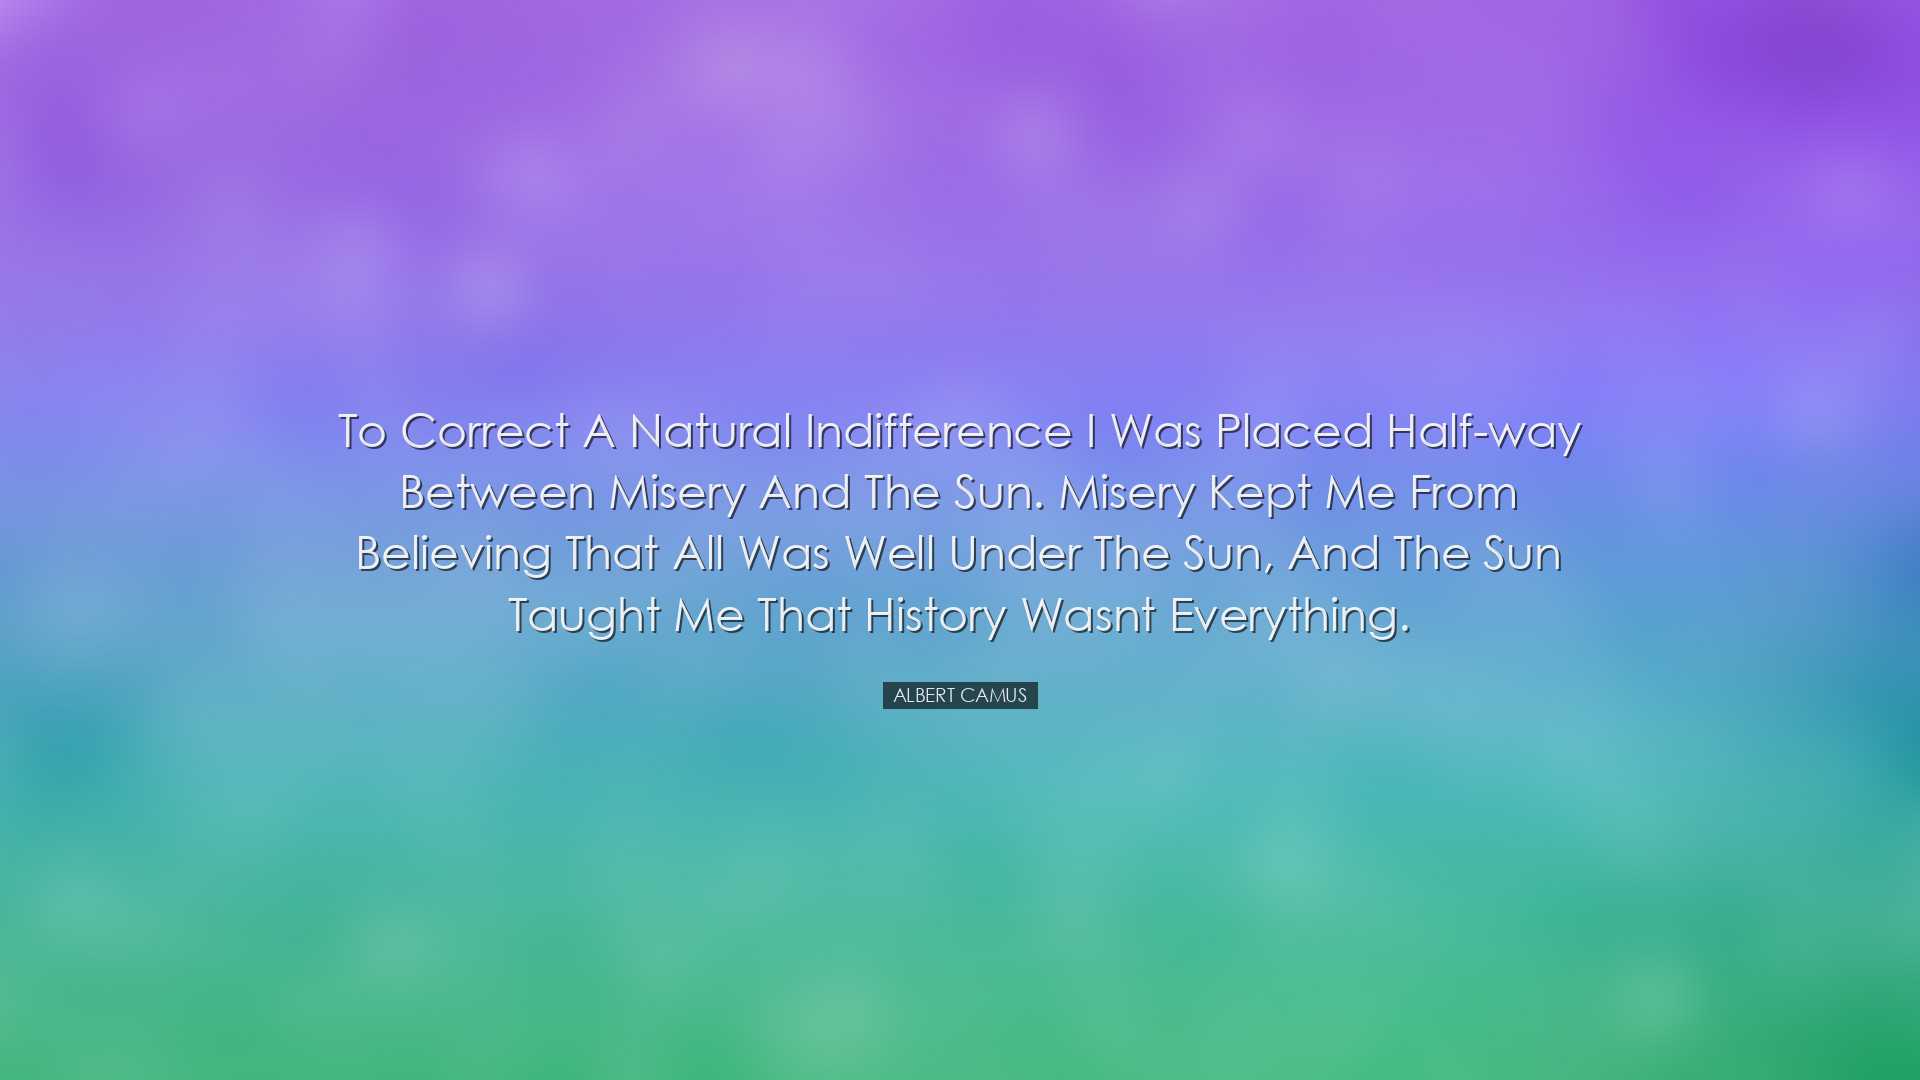 To correct a natural indifference I was placed half-way between mi